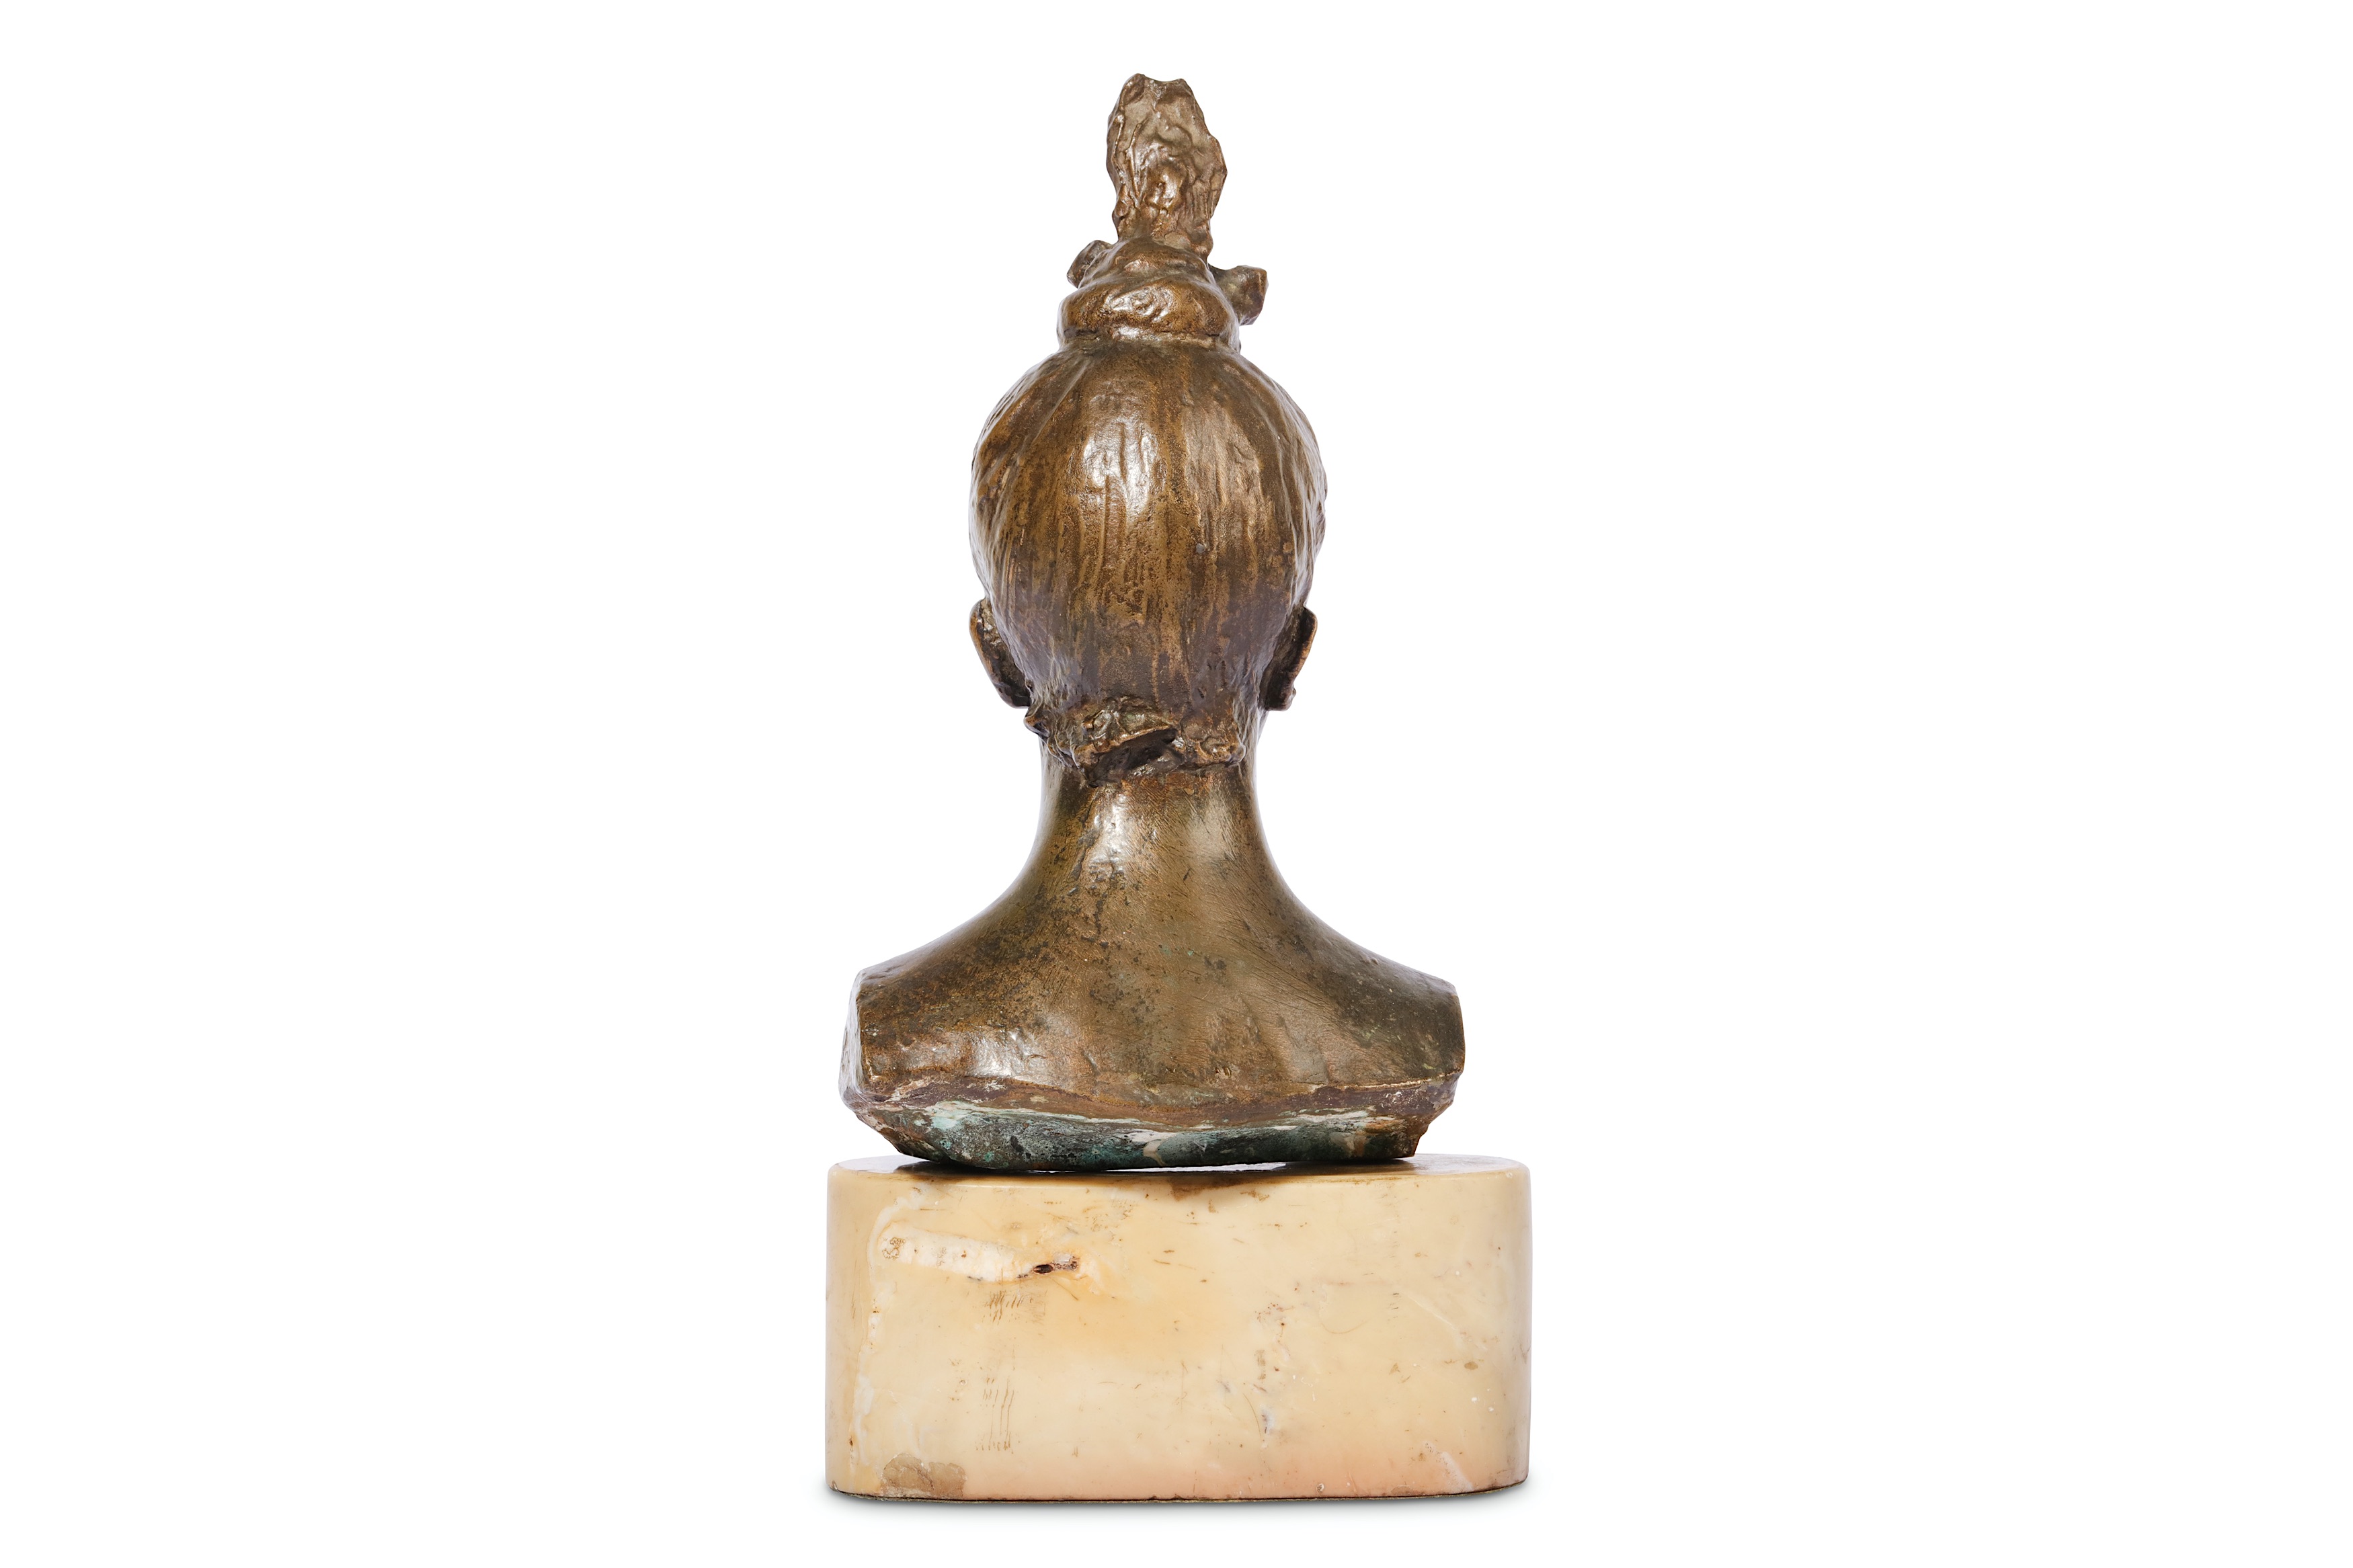 AN EARLY 20TH CENTURY SPANISH BRONZE BUST OF A WOMAN - Image 2 of 3